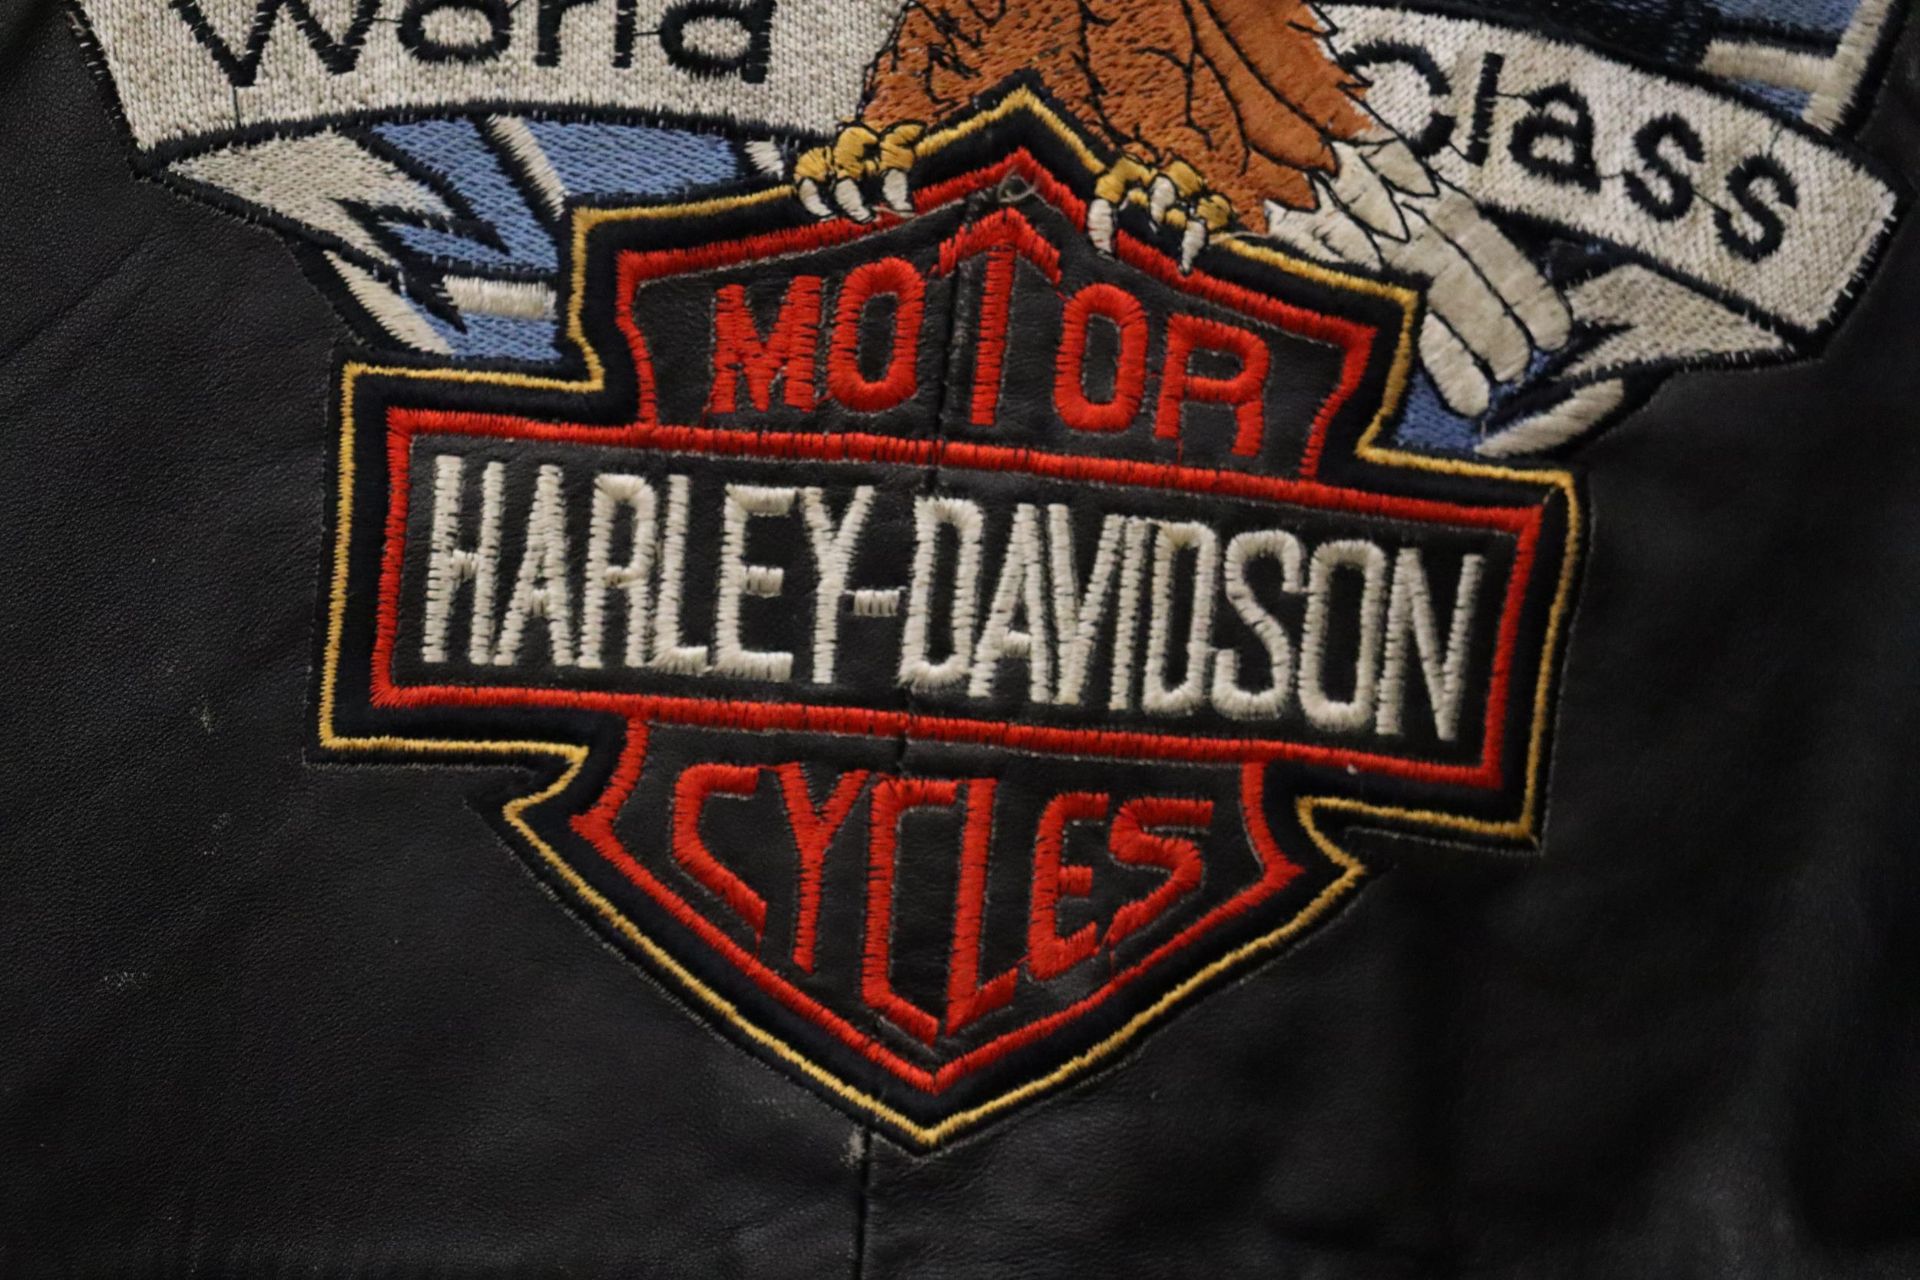 A VINTAGE HARLEY DAVIDSON LEATHER MOTOR CYCLE JACKET WITH LOGO TO THE BACK - Image 11 of 11